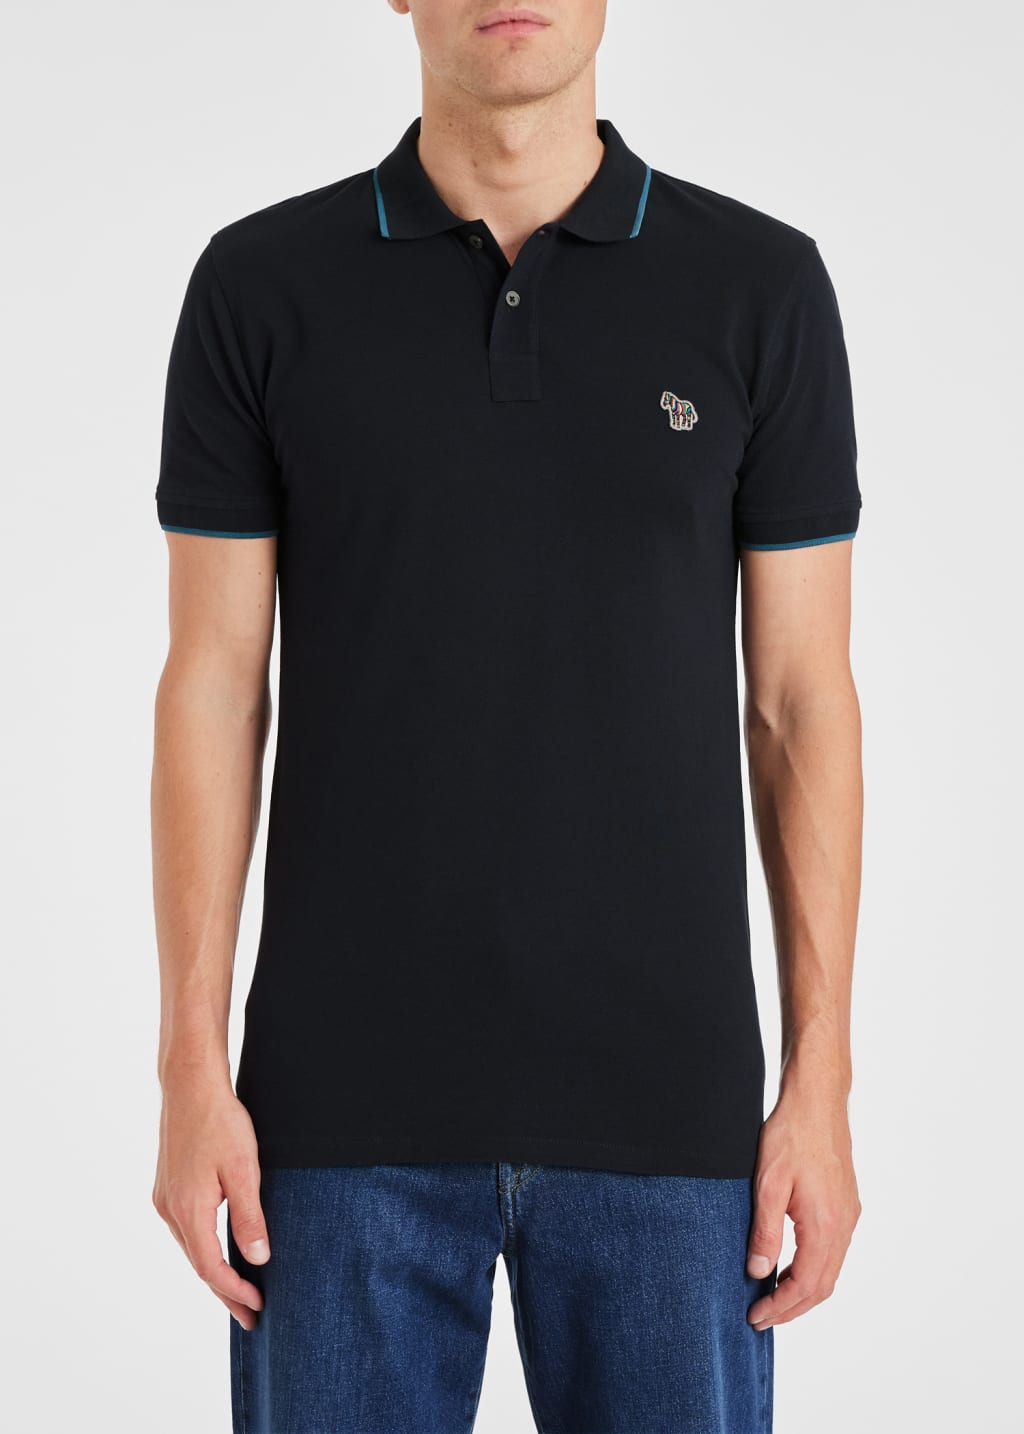 Model View - Slim-Fit Navy Zebra Logo Polo Shirt With Blue Tipping Paul Smith